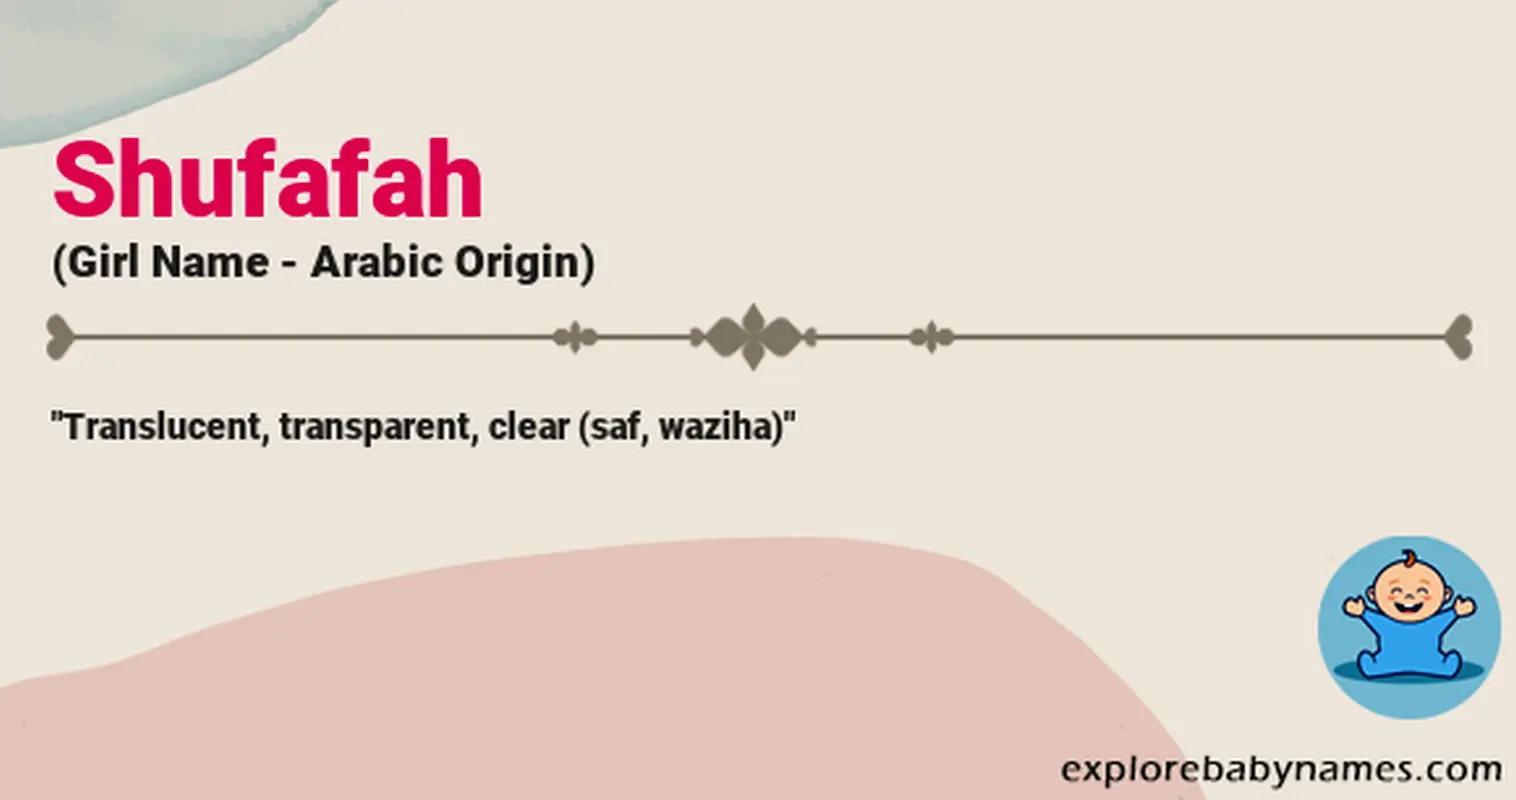 Meaning of Shufafah